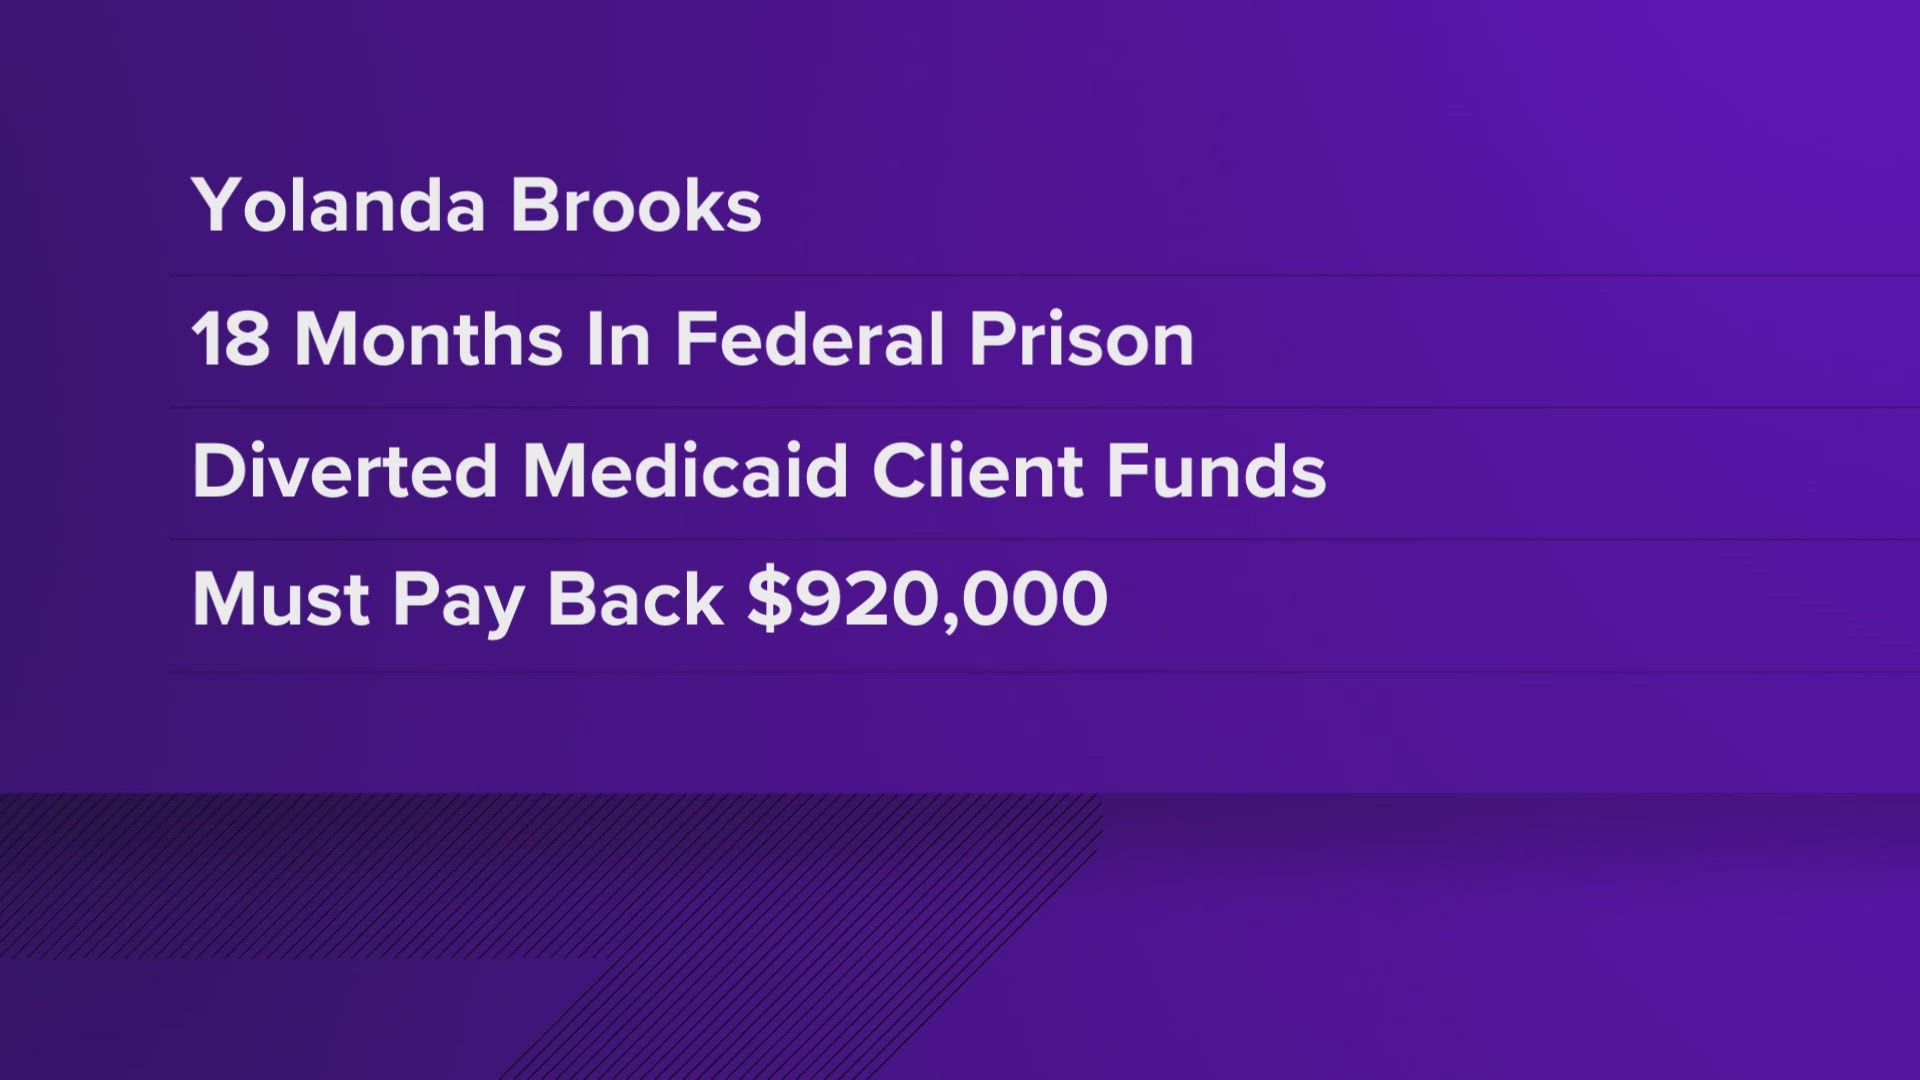 Yolanda Brooks worked as a Medicaid supervisor for 15 years. During that time, prosecutors say she diverted clients' refund checks to her accounts.